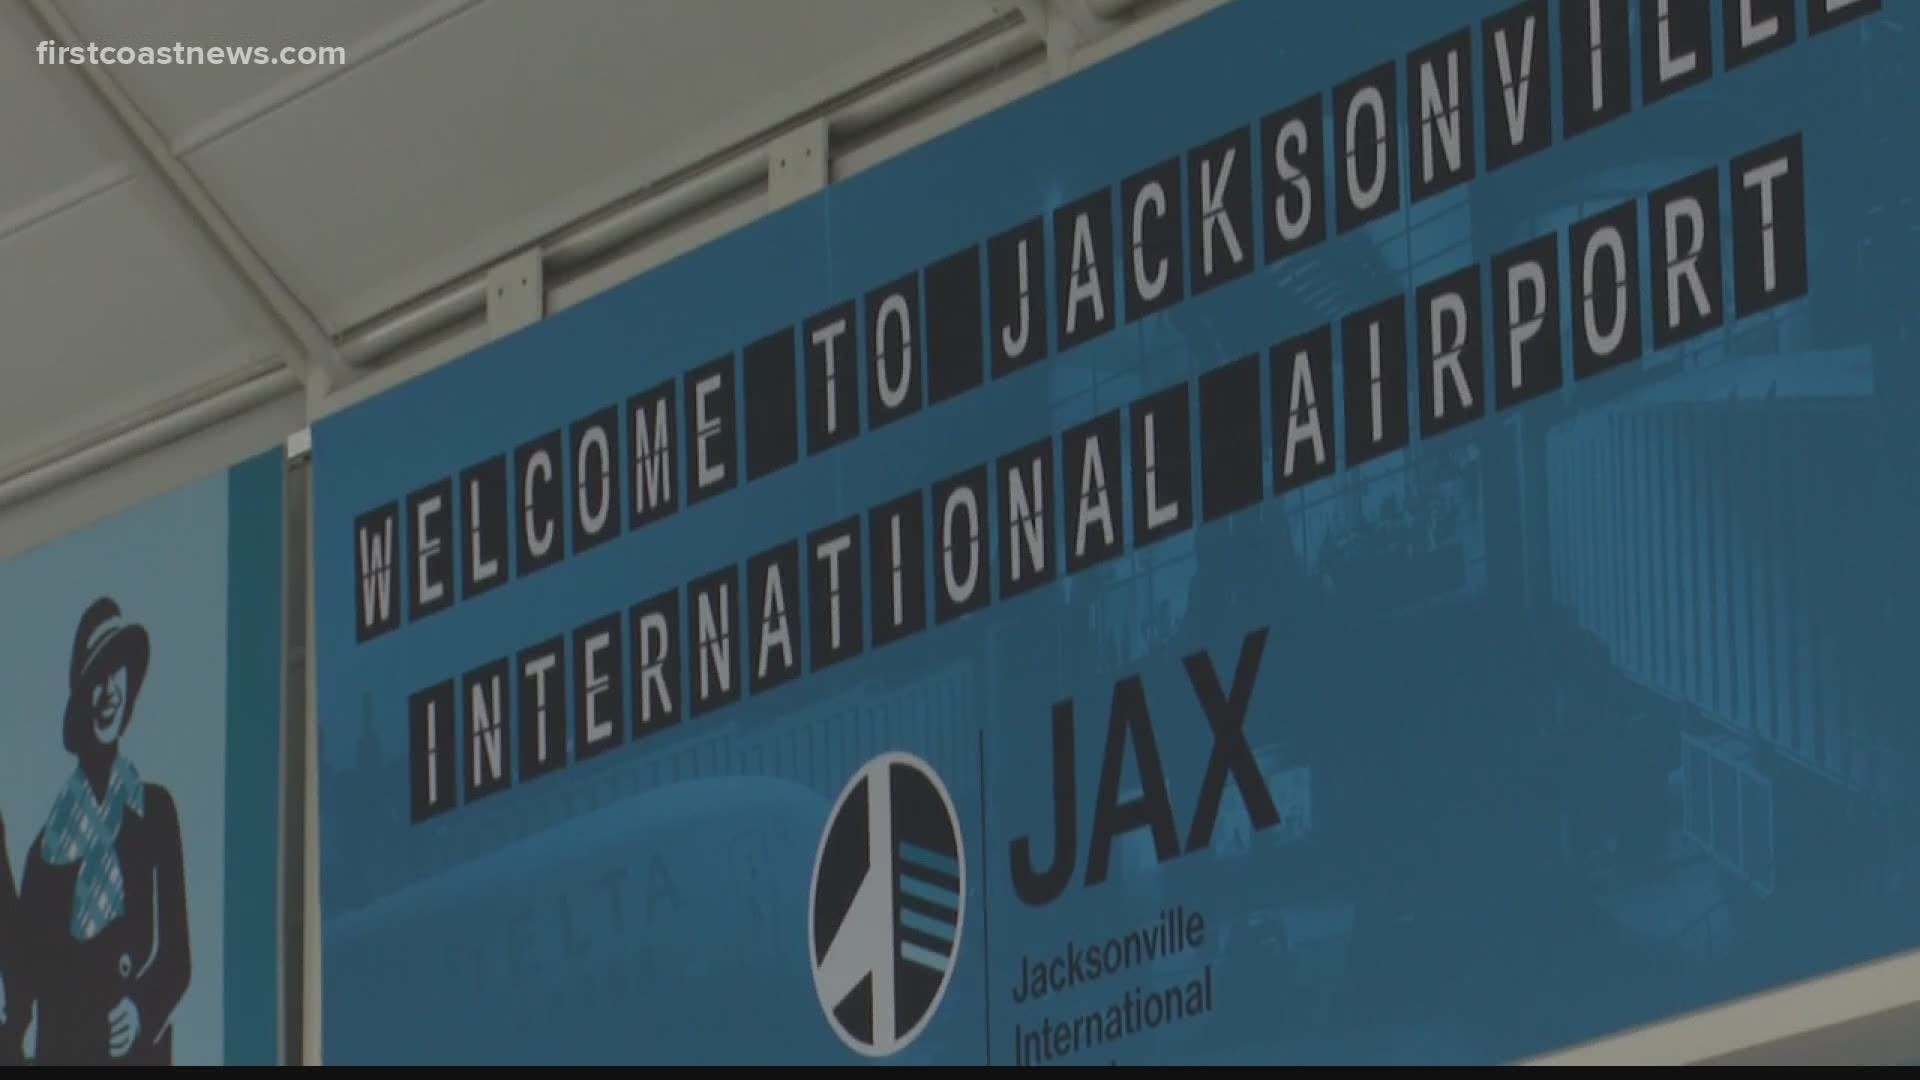 Air travel was down 97 percent in April and nearly 90 percent in May from the previous year at Jacksonville International Airport.